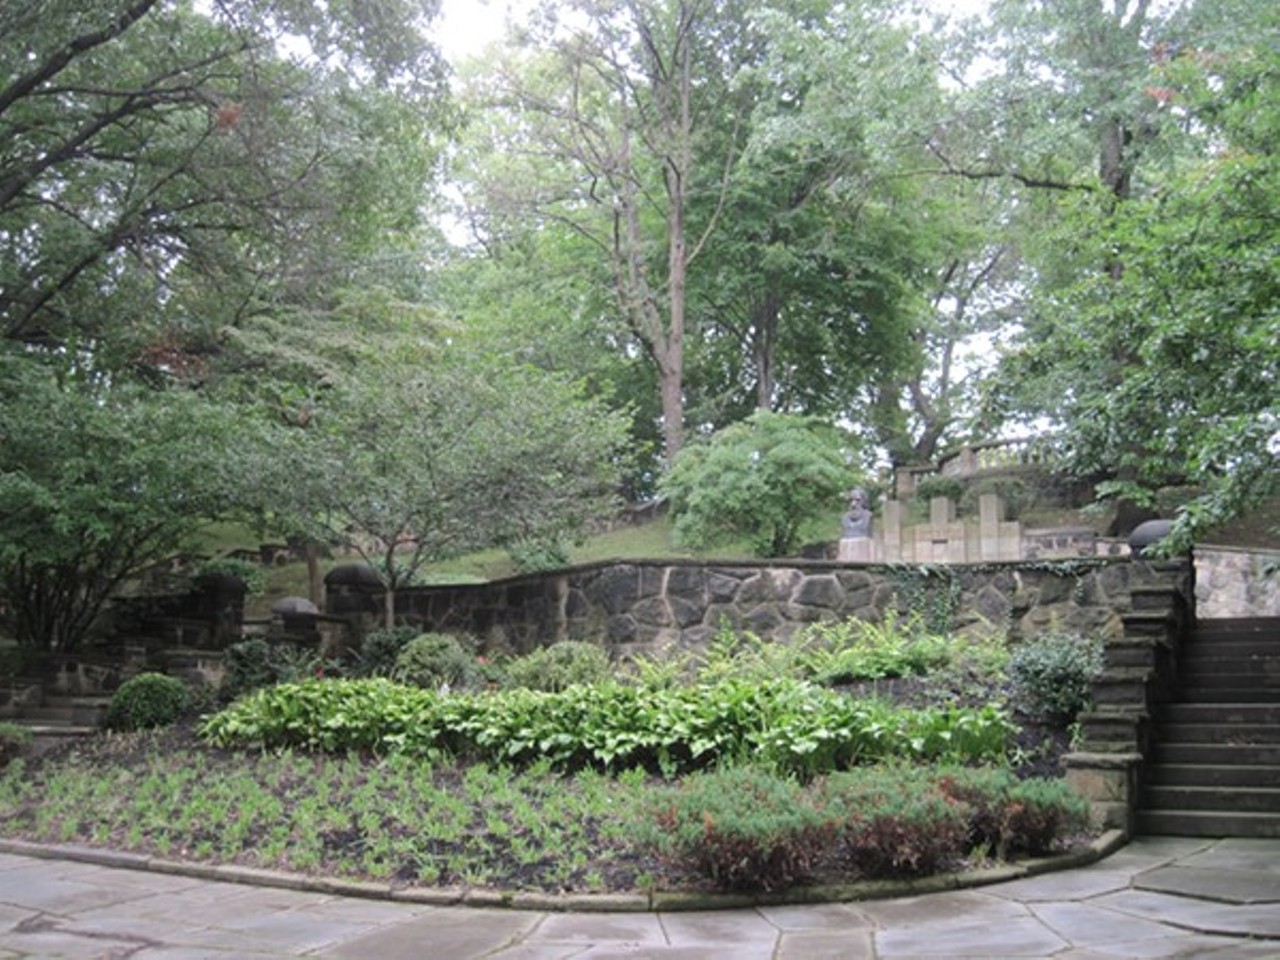  Cultural Gardens Trail
750 E. 88th St.., Cleveland
Where: Rockefeller Park
Distance: 4.9 Miles
If you’re close to the city, Rockefeller Park is a great city trail. You can see all of the Cultural Gardens and all of the historical sites in the park.